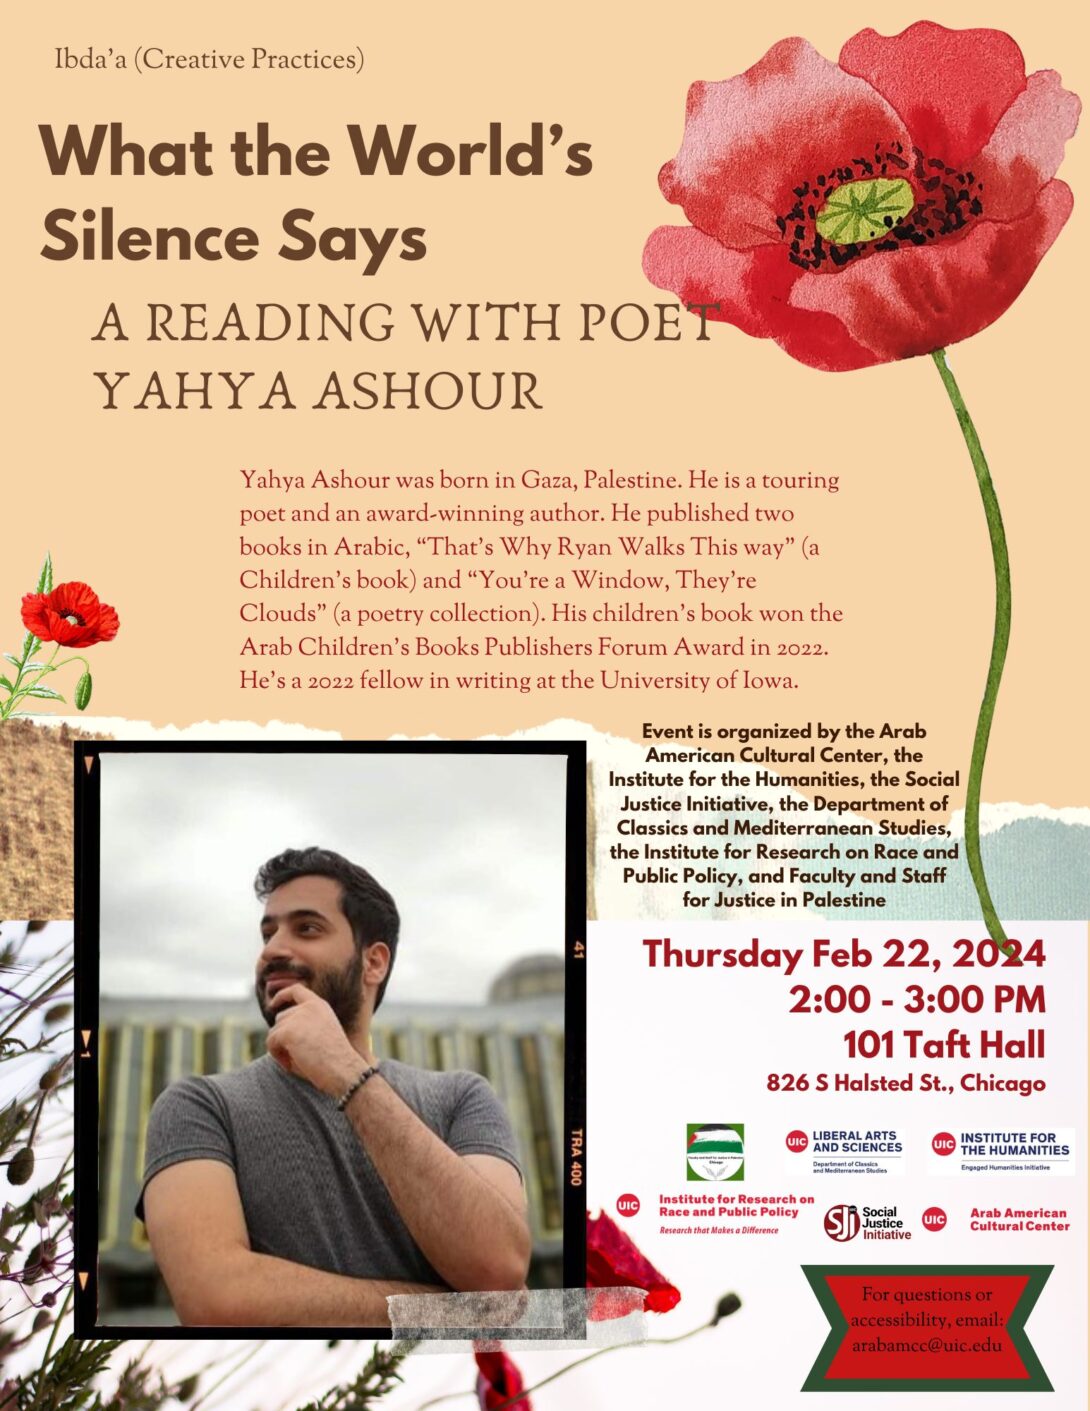 Tan background with a field of poppies rising upward. In the lower corner foreground is an image of a young bearded man in a grey t-shirt looking off into the distance.